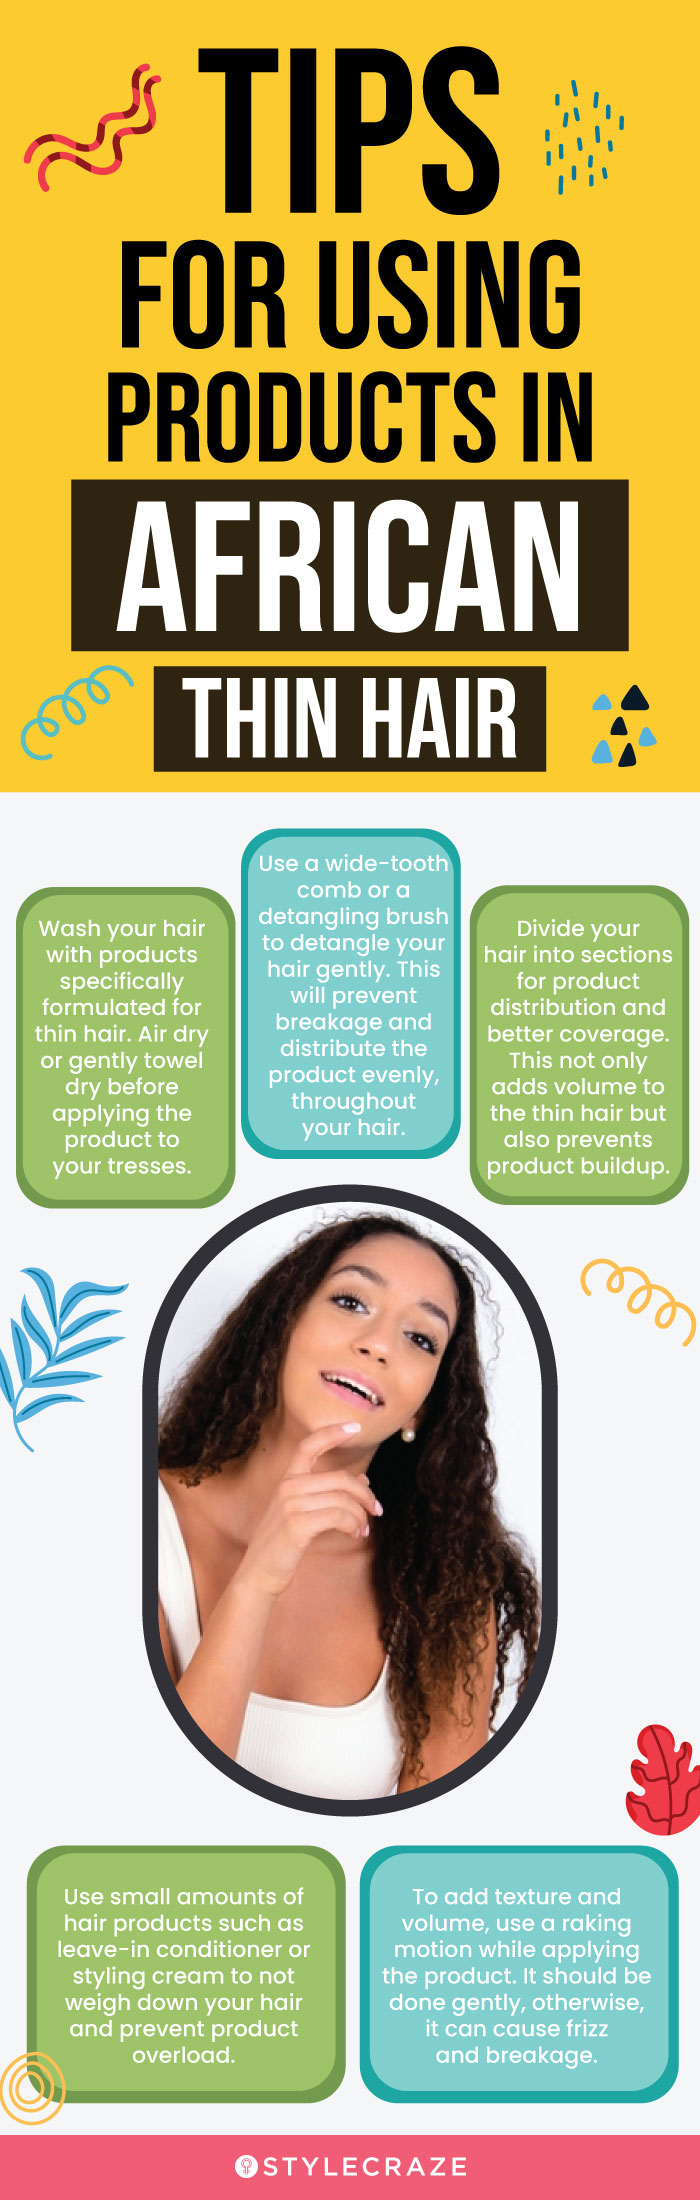 Tips For Using Products In African Thin Hair (infographic)